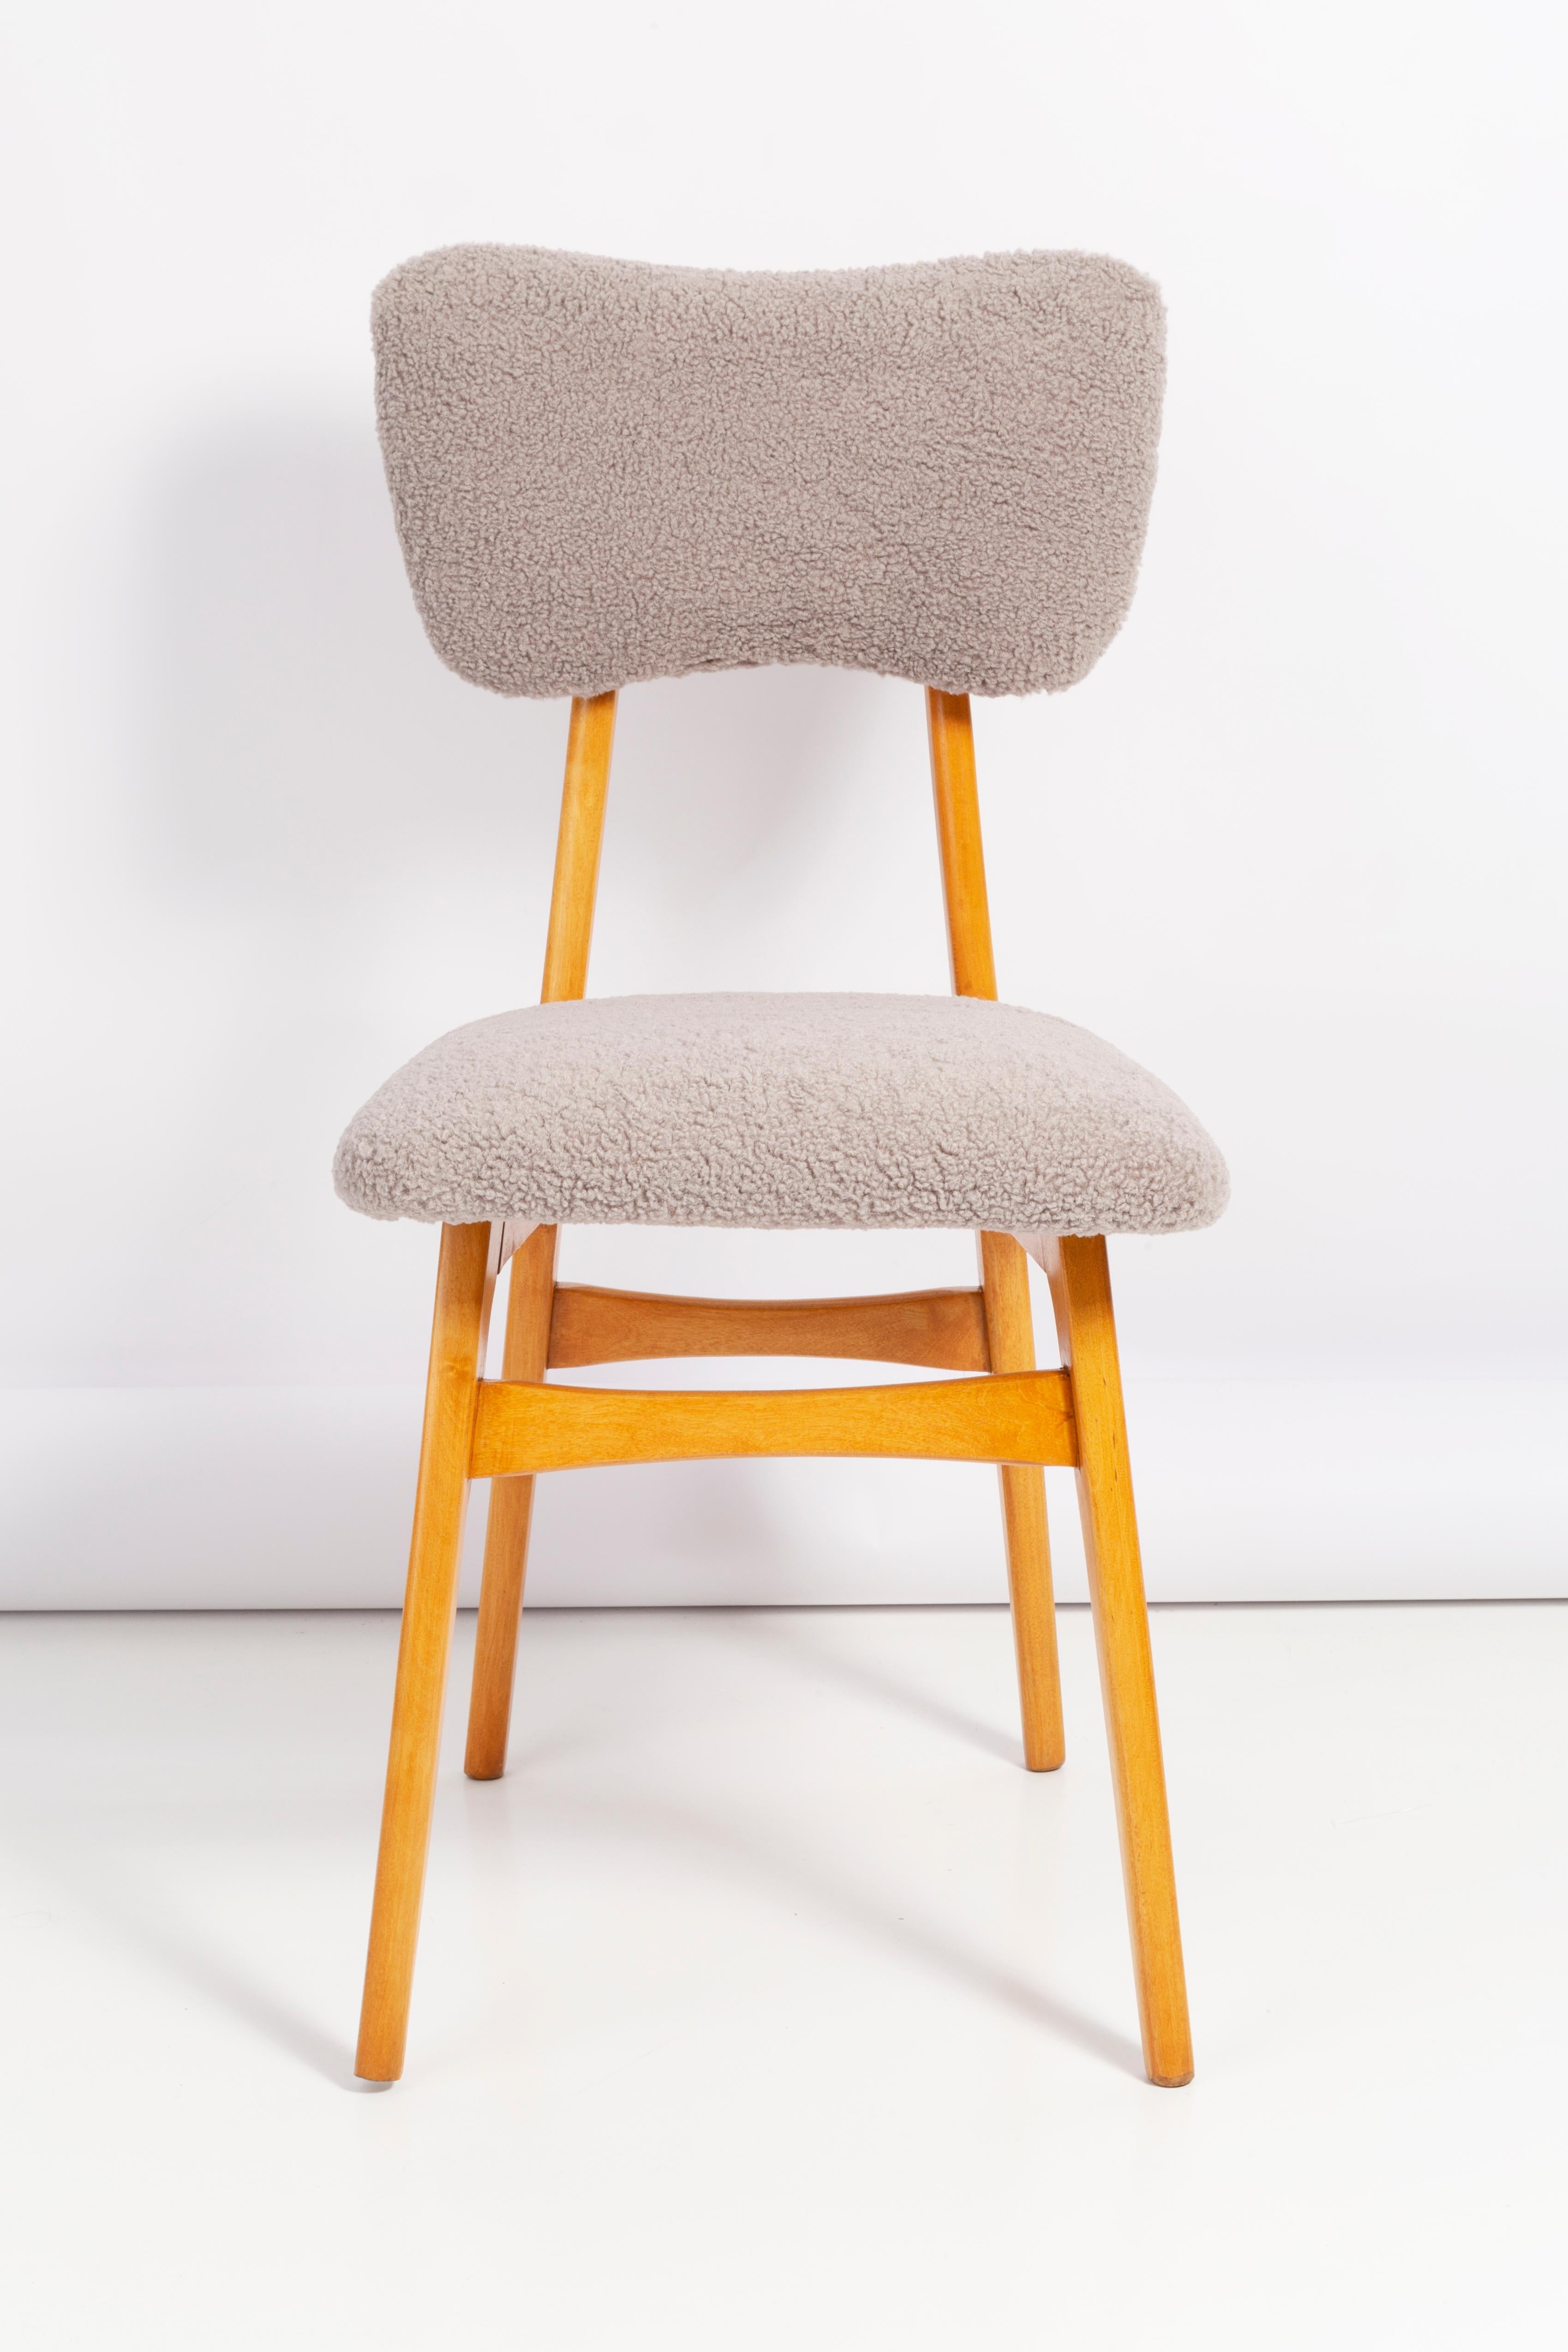 Chairs designed by Prof. Rajmund Halas. Made of beechwood. Chairs are after a complete upholstery renovation; the woodwork has been refreshed. Seat and back is dressed in gray, durable and pleasant to the touch bouclé fabric. Chairs are stabile and